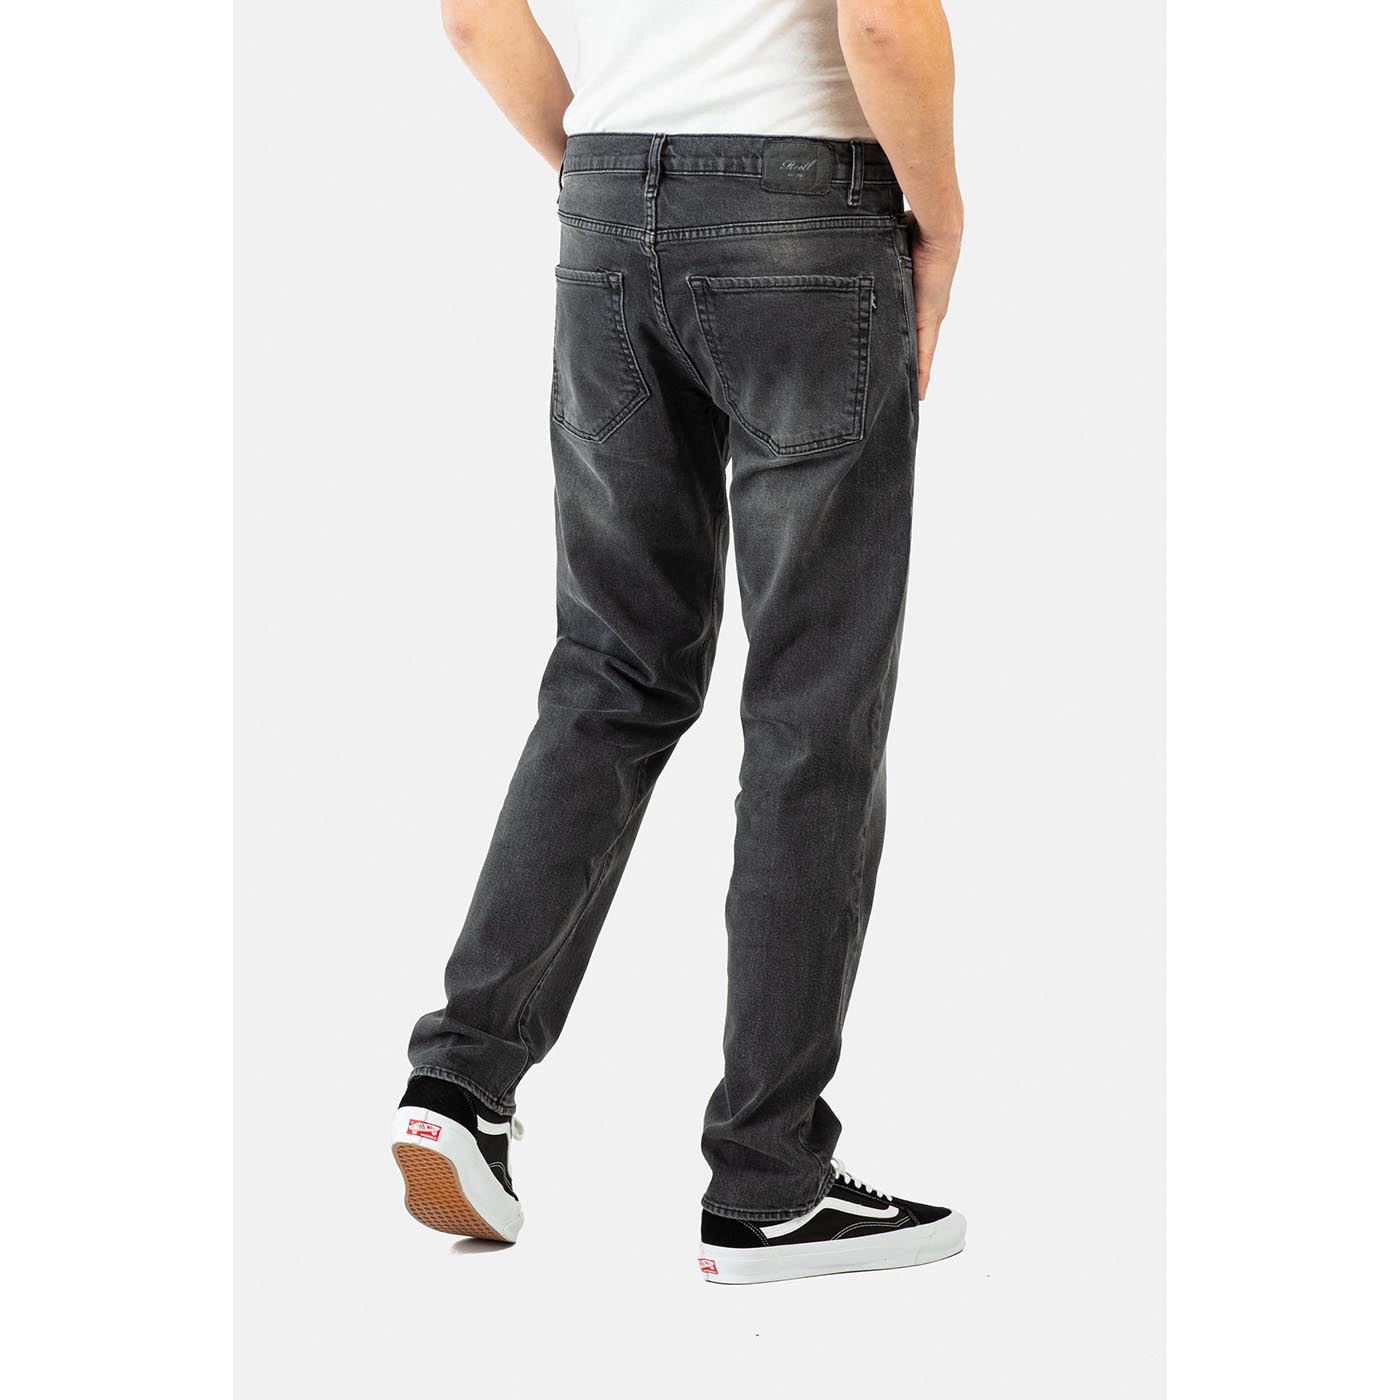 Reell Jeans Barfly Straight Fit Jeans Black Wash